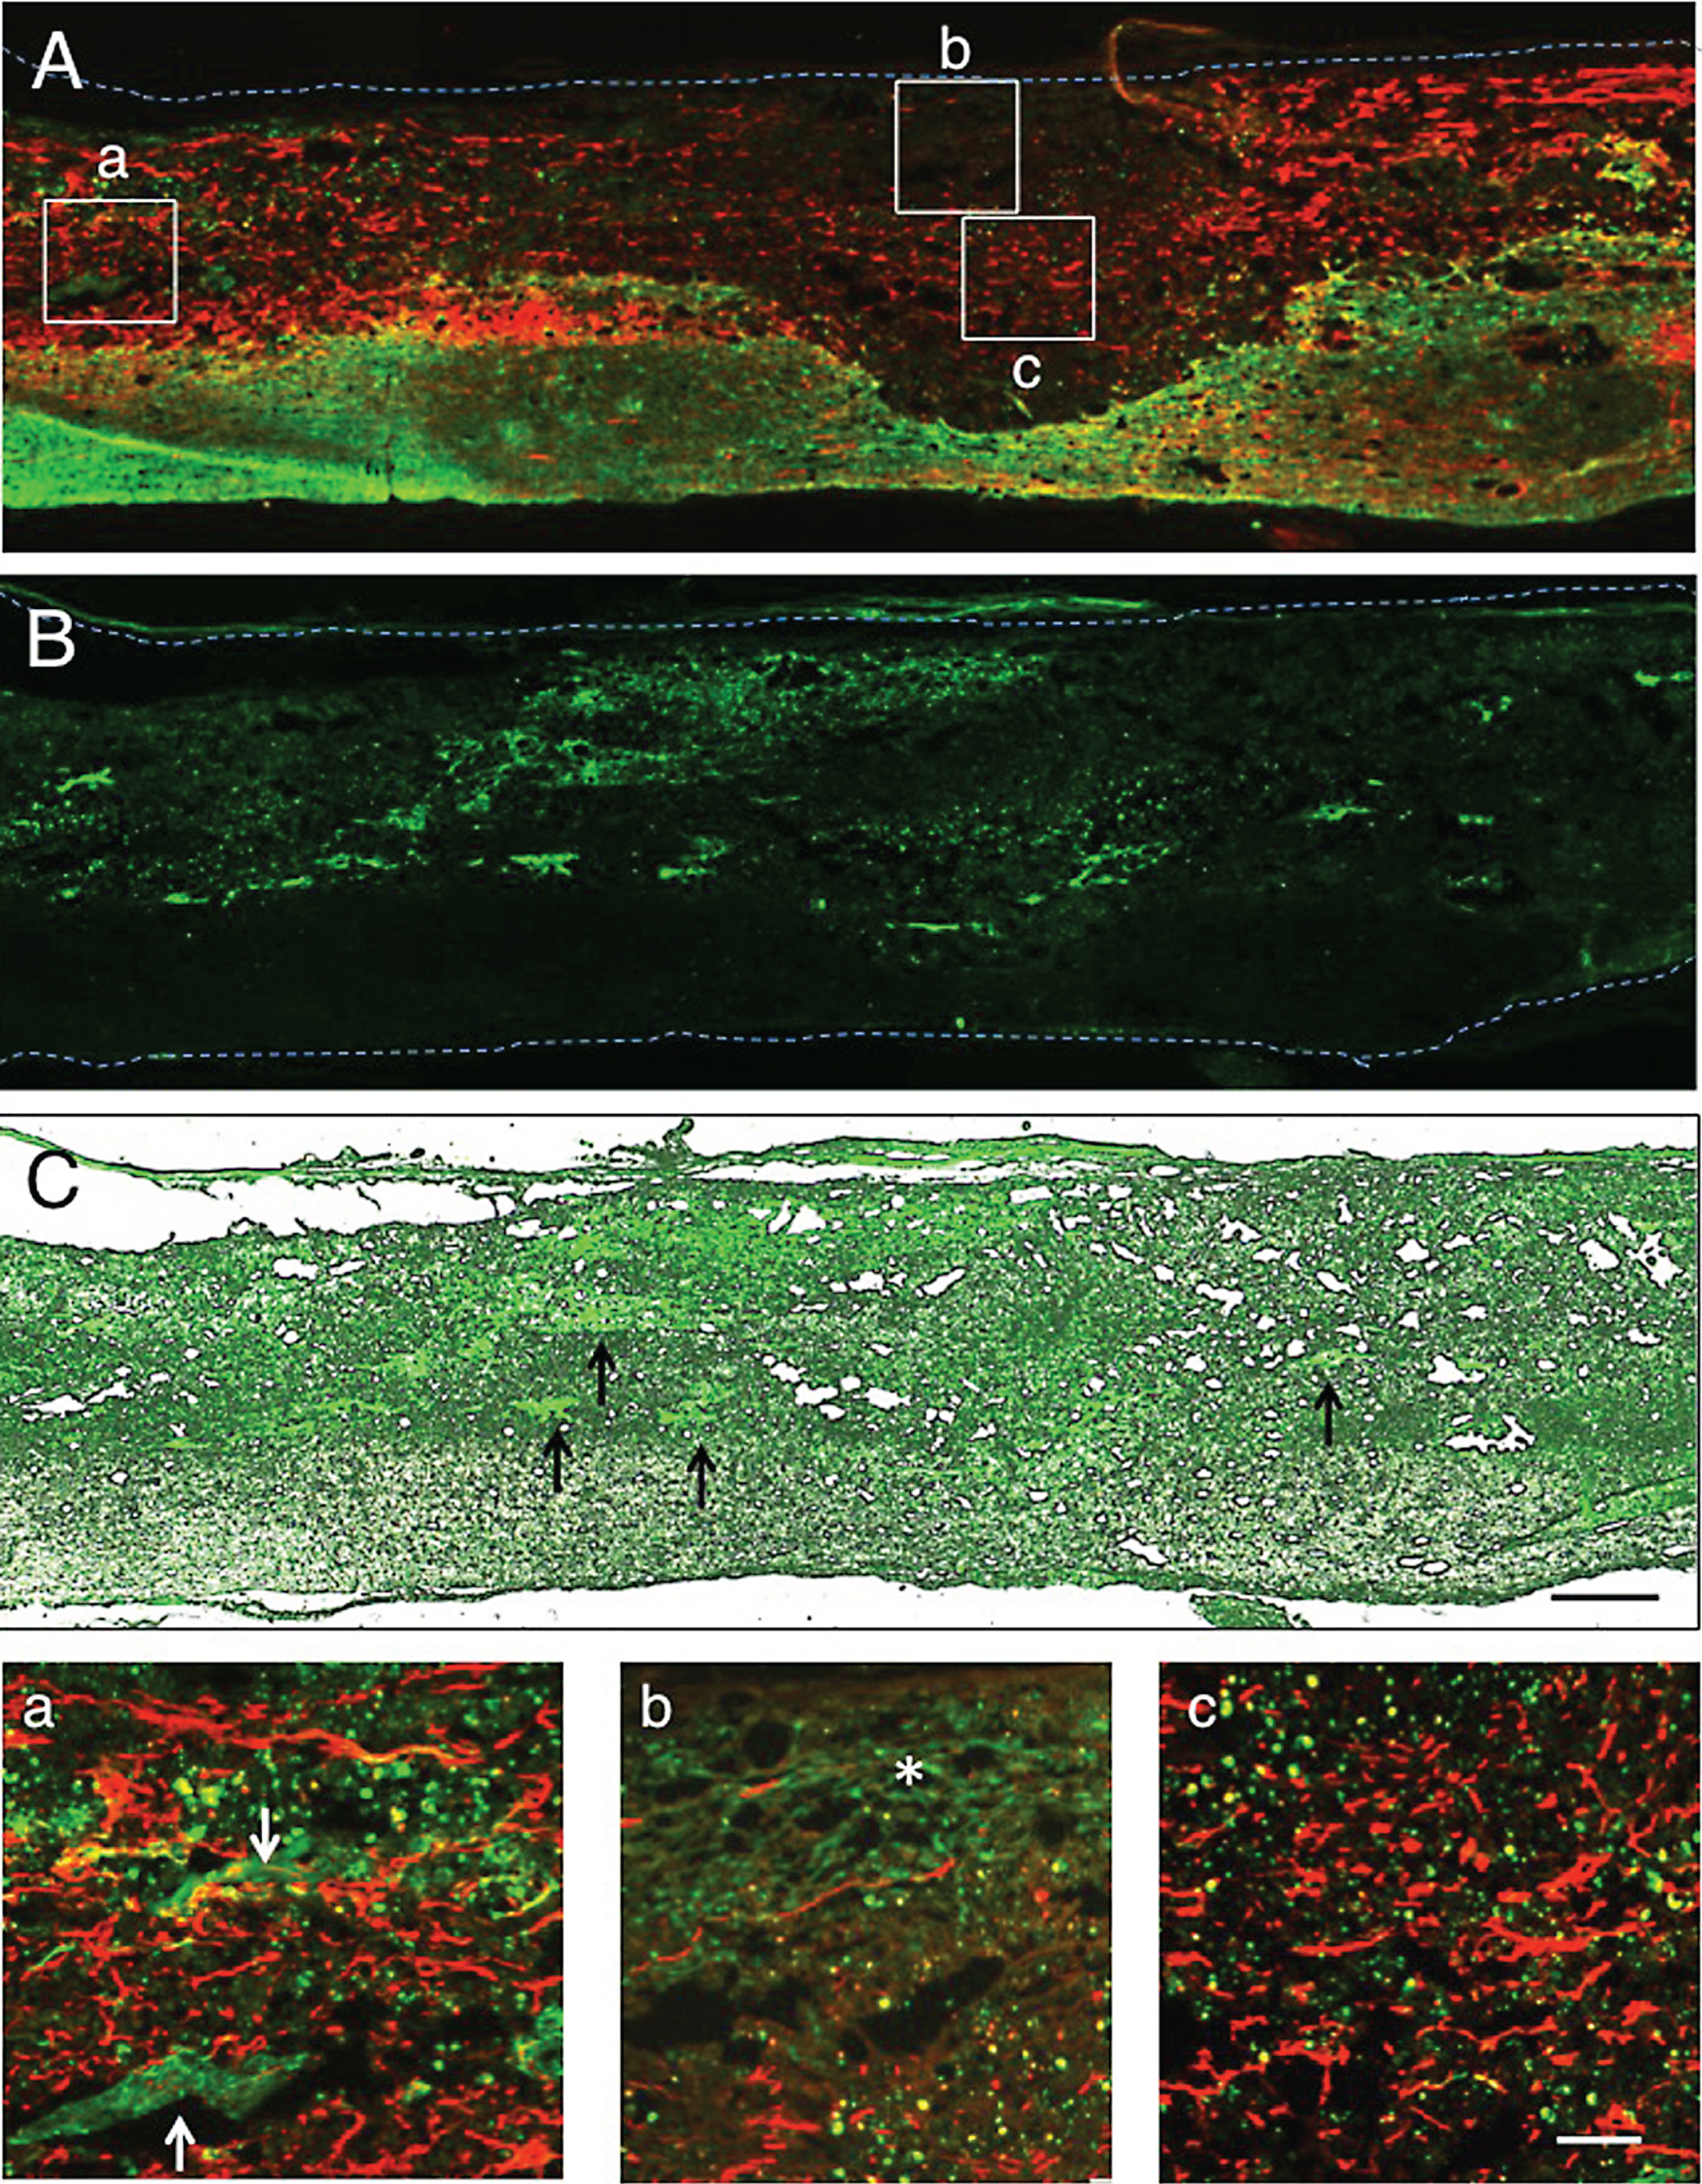 1 w-TP. Double staining for axons and astrocytes. A: The spinal cord was immunostained for axons (red) and astrocytes (green). The dotted line outlines the spinal cord. Numerous axons extend through the astrocyte-devoid areas (upper half of the spinal cord) in the spinal cord lesion. B: This simple fluorescent micrograph was taken from a section adjacent to that of panel A, showing various-sized clusters of engrafted CPECs. C: Panel B was merged in the unstained transmitted-light picture to show the localization of engrafted CPECs in the spinal cord tissue. Arrows point to some CPEC clusters. a: Rectangle a in panel A was enlarged. Some CPECs (arrows) can be seen among axons. b: Rectangle b in panel A was enlarged. Axons are scarce around the stacked CPECs (green, asterisk). c: Rectangle c in panel A was enlarged. Many axons extend without an association with engrafted CPECs. Scale: 500 μm for A-C, and 100 μm for a-c.